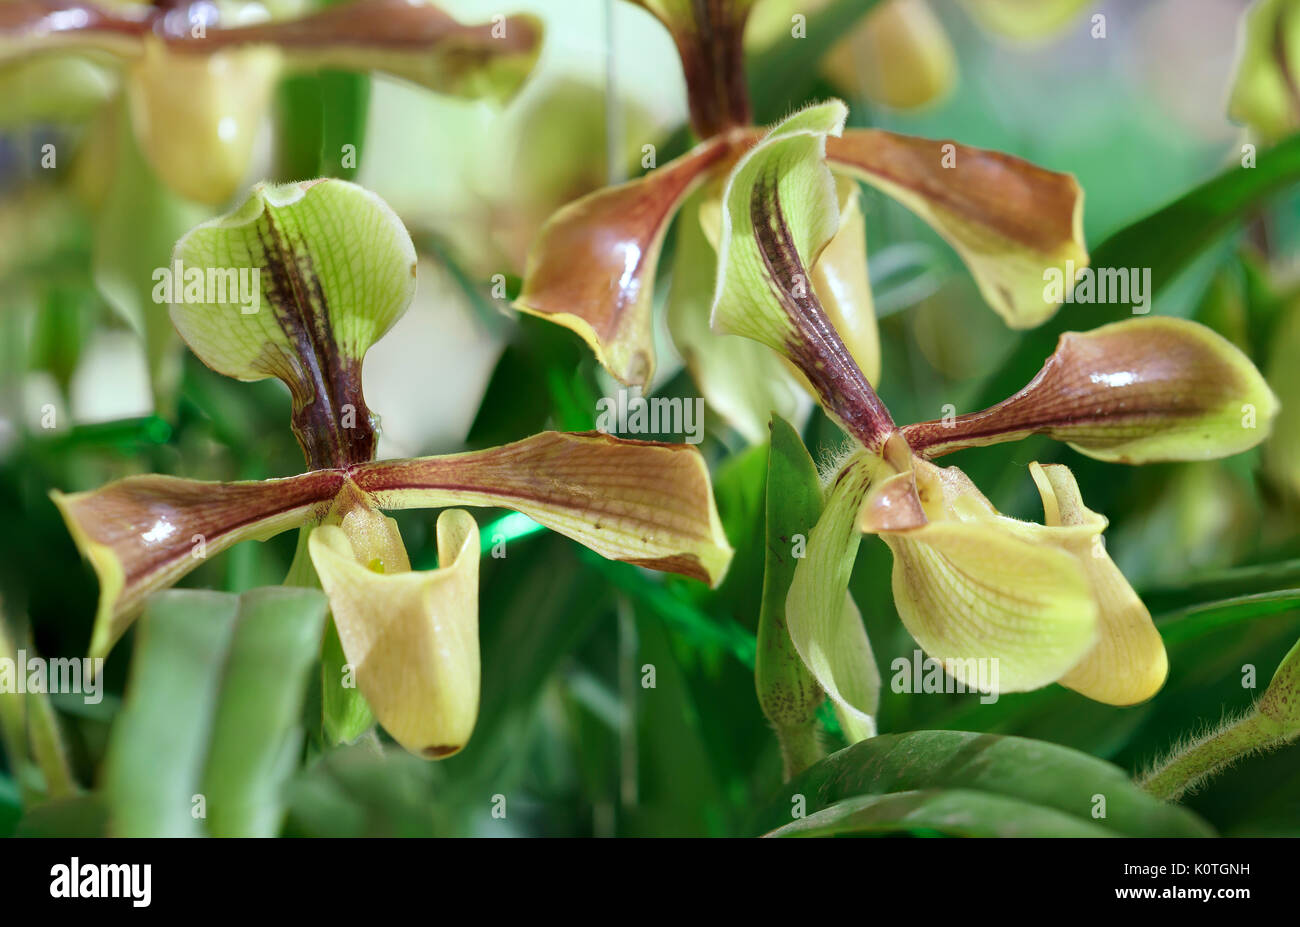 Paphiopedilum orchids flowers bloom in spring adorn the beauty of nature Stock Photo